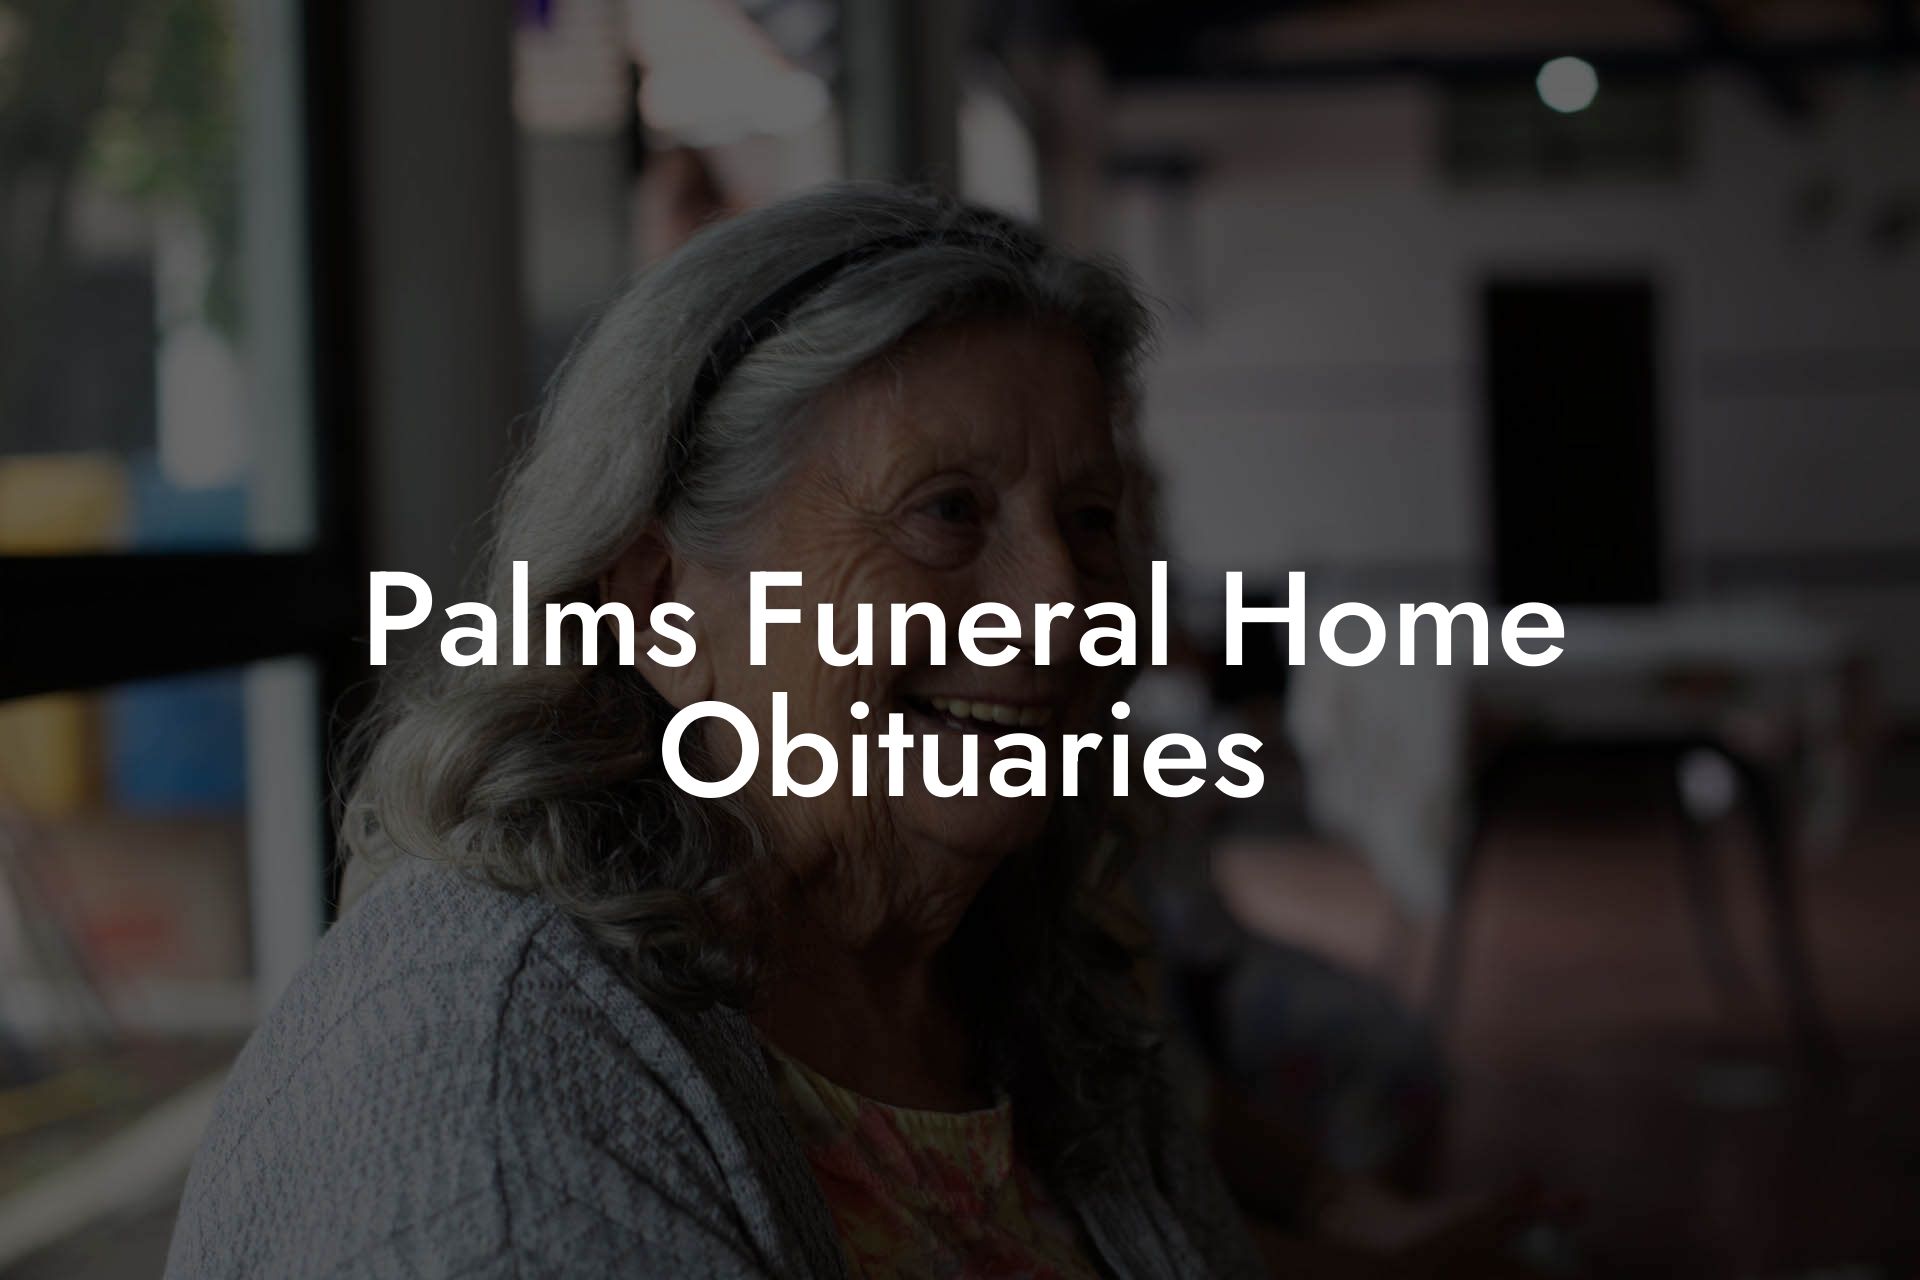 Palms Funeral Home Obituaries